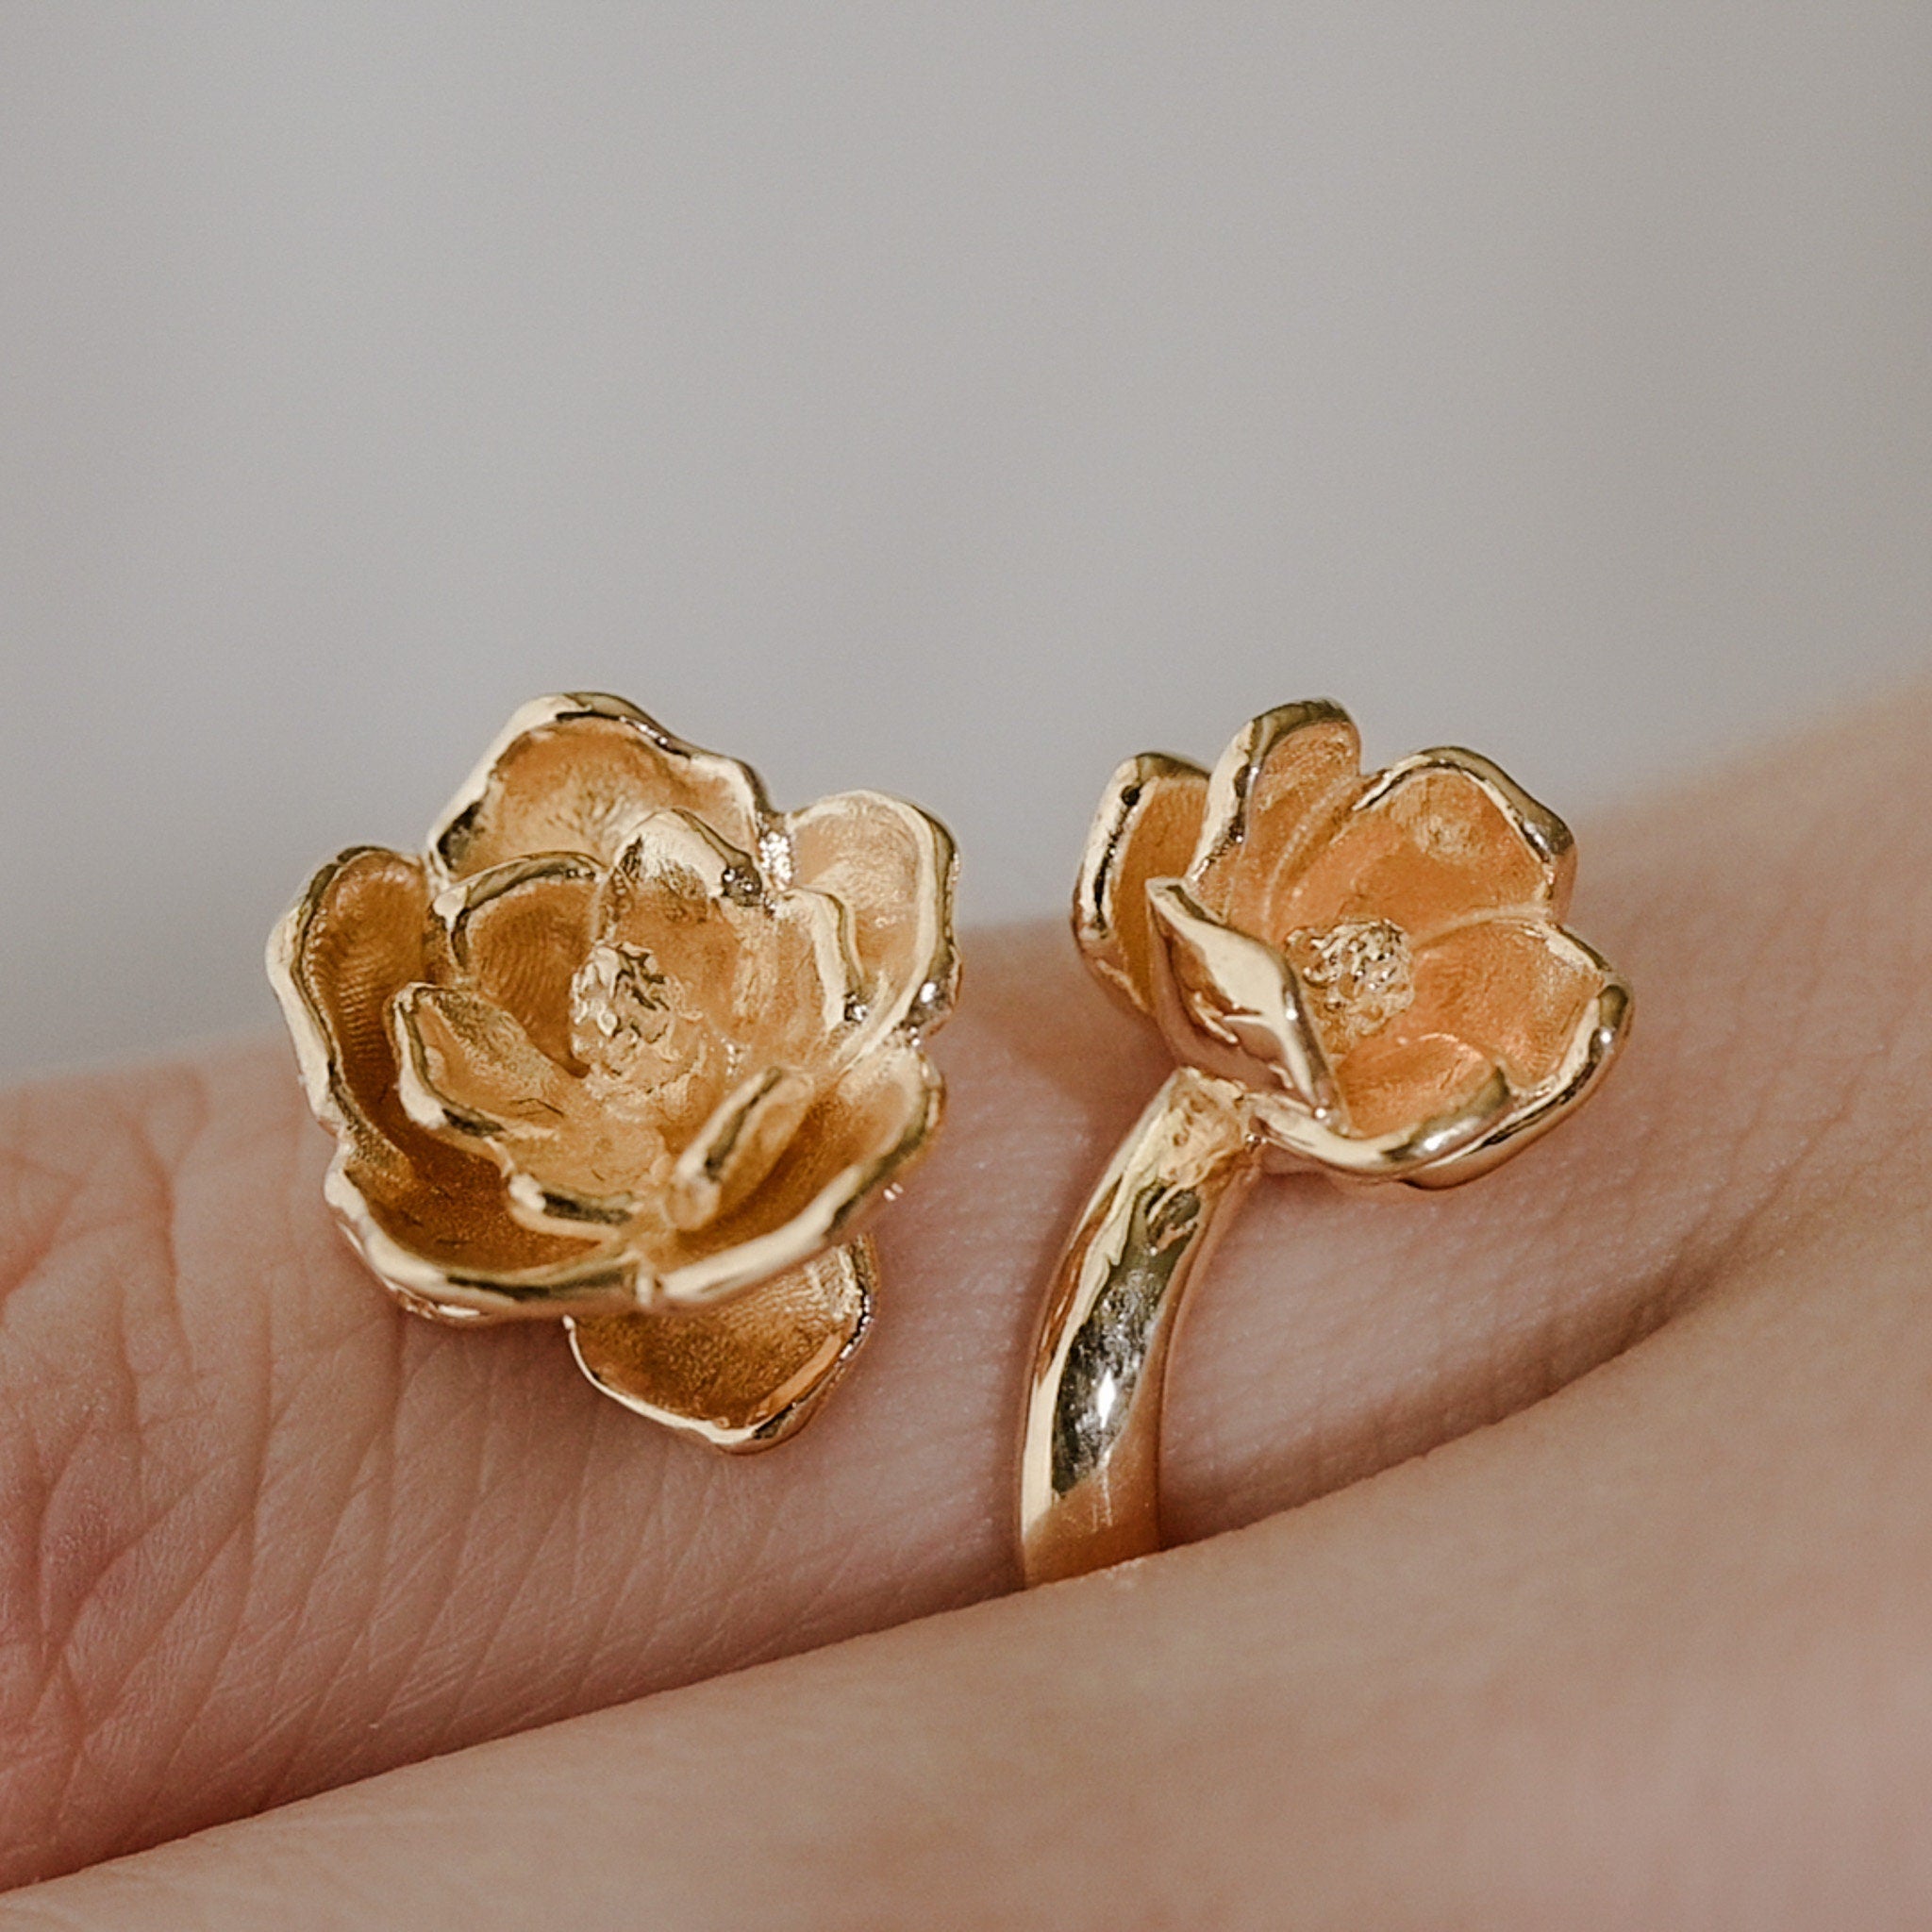 Magnificent 22 Karat Yellow Gold Beaded Floral Statement Ring